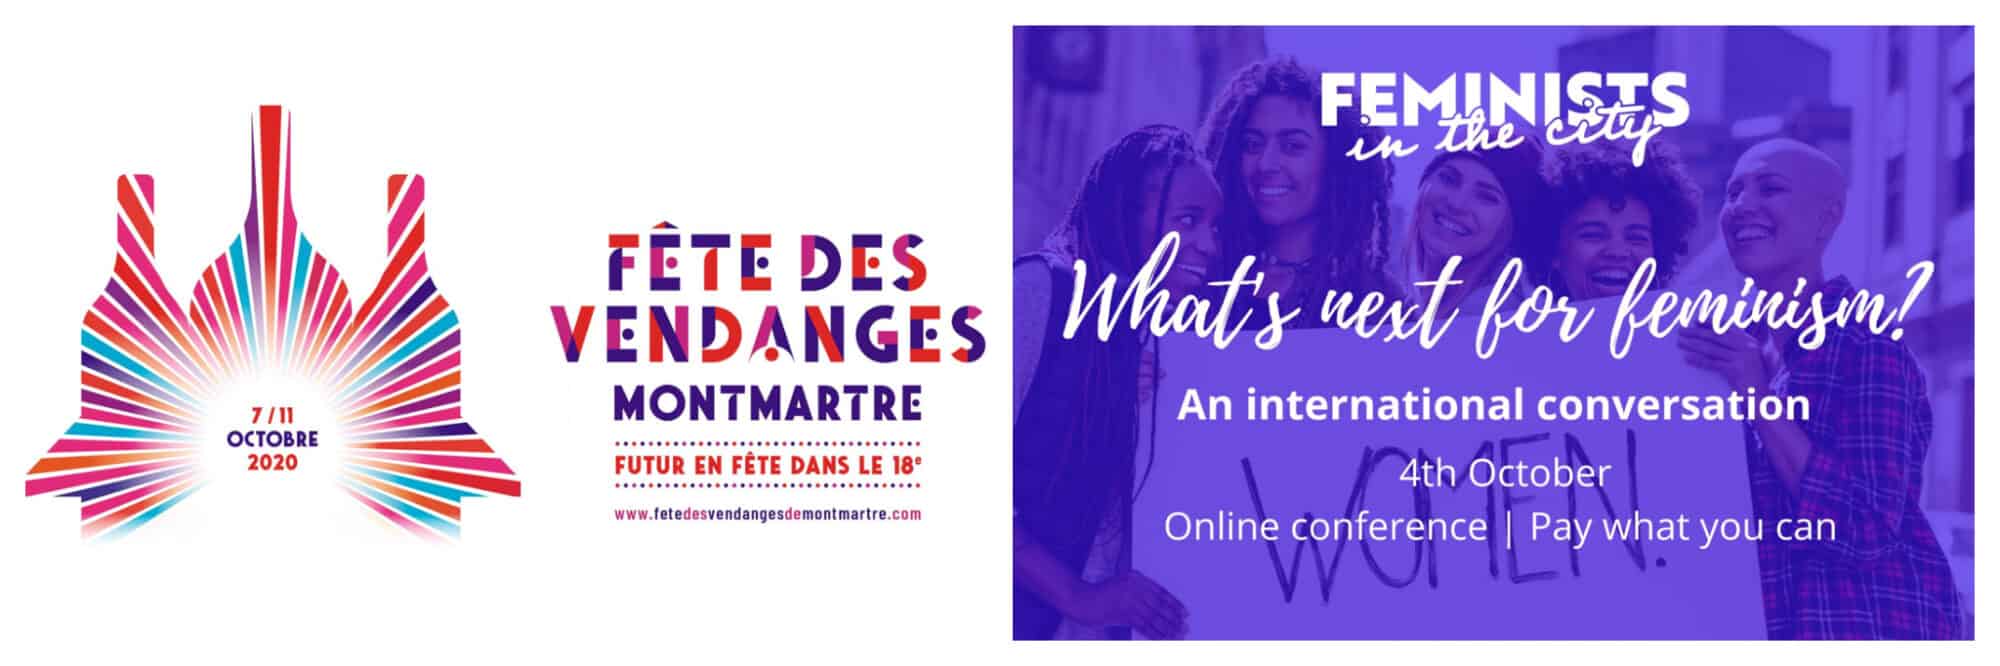 Left: a promotional image for Fete des Vendanges de Montmartre. Right: a promotional image for What's next for feminism? run by Feminists in the City.